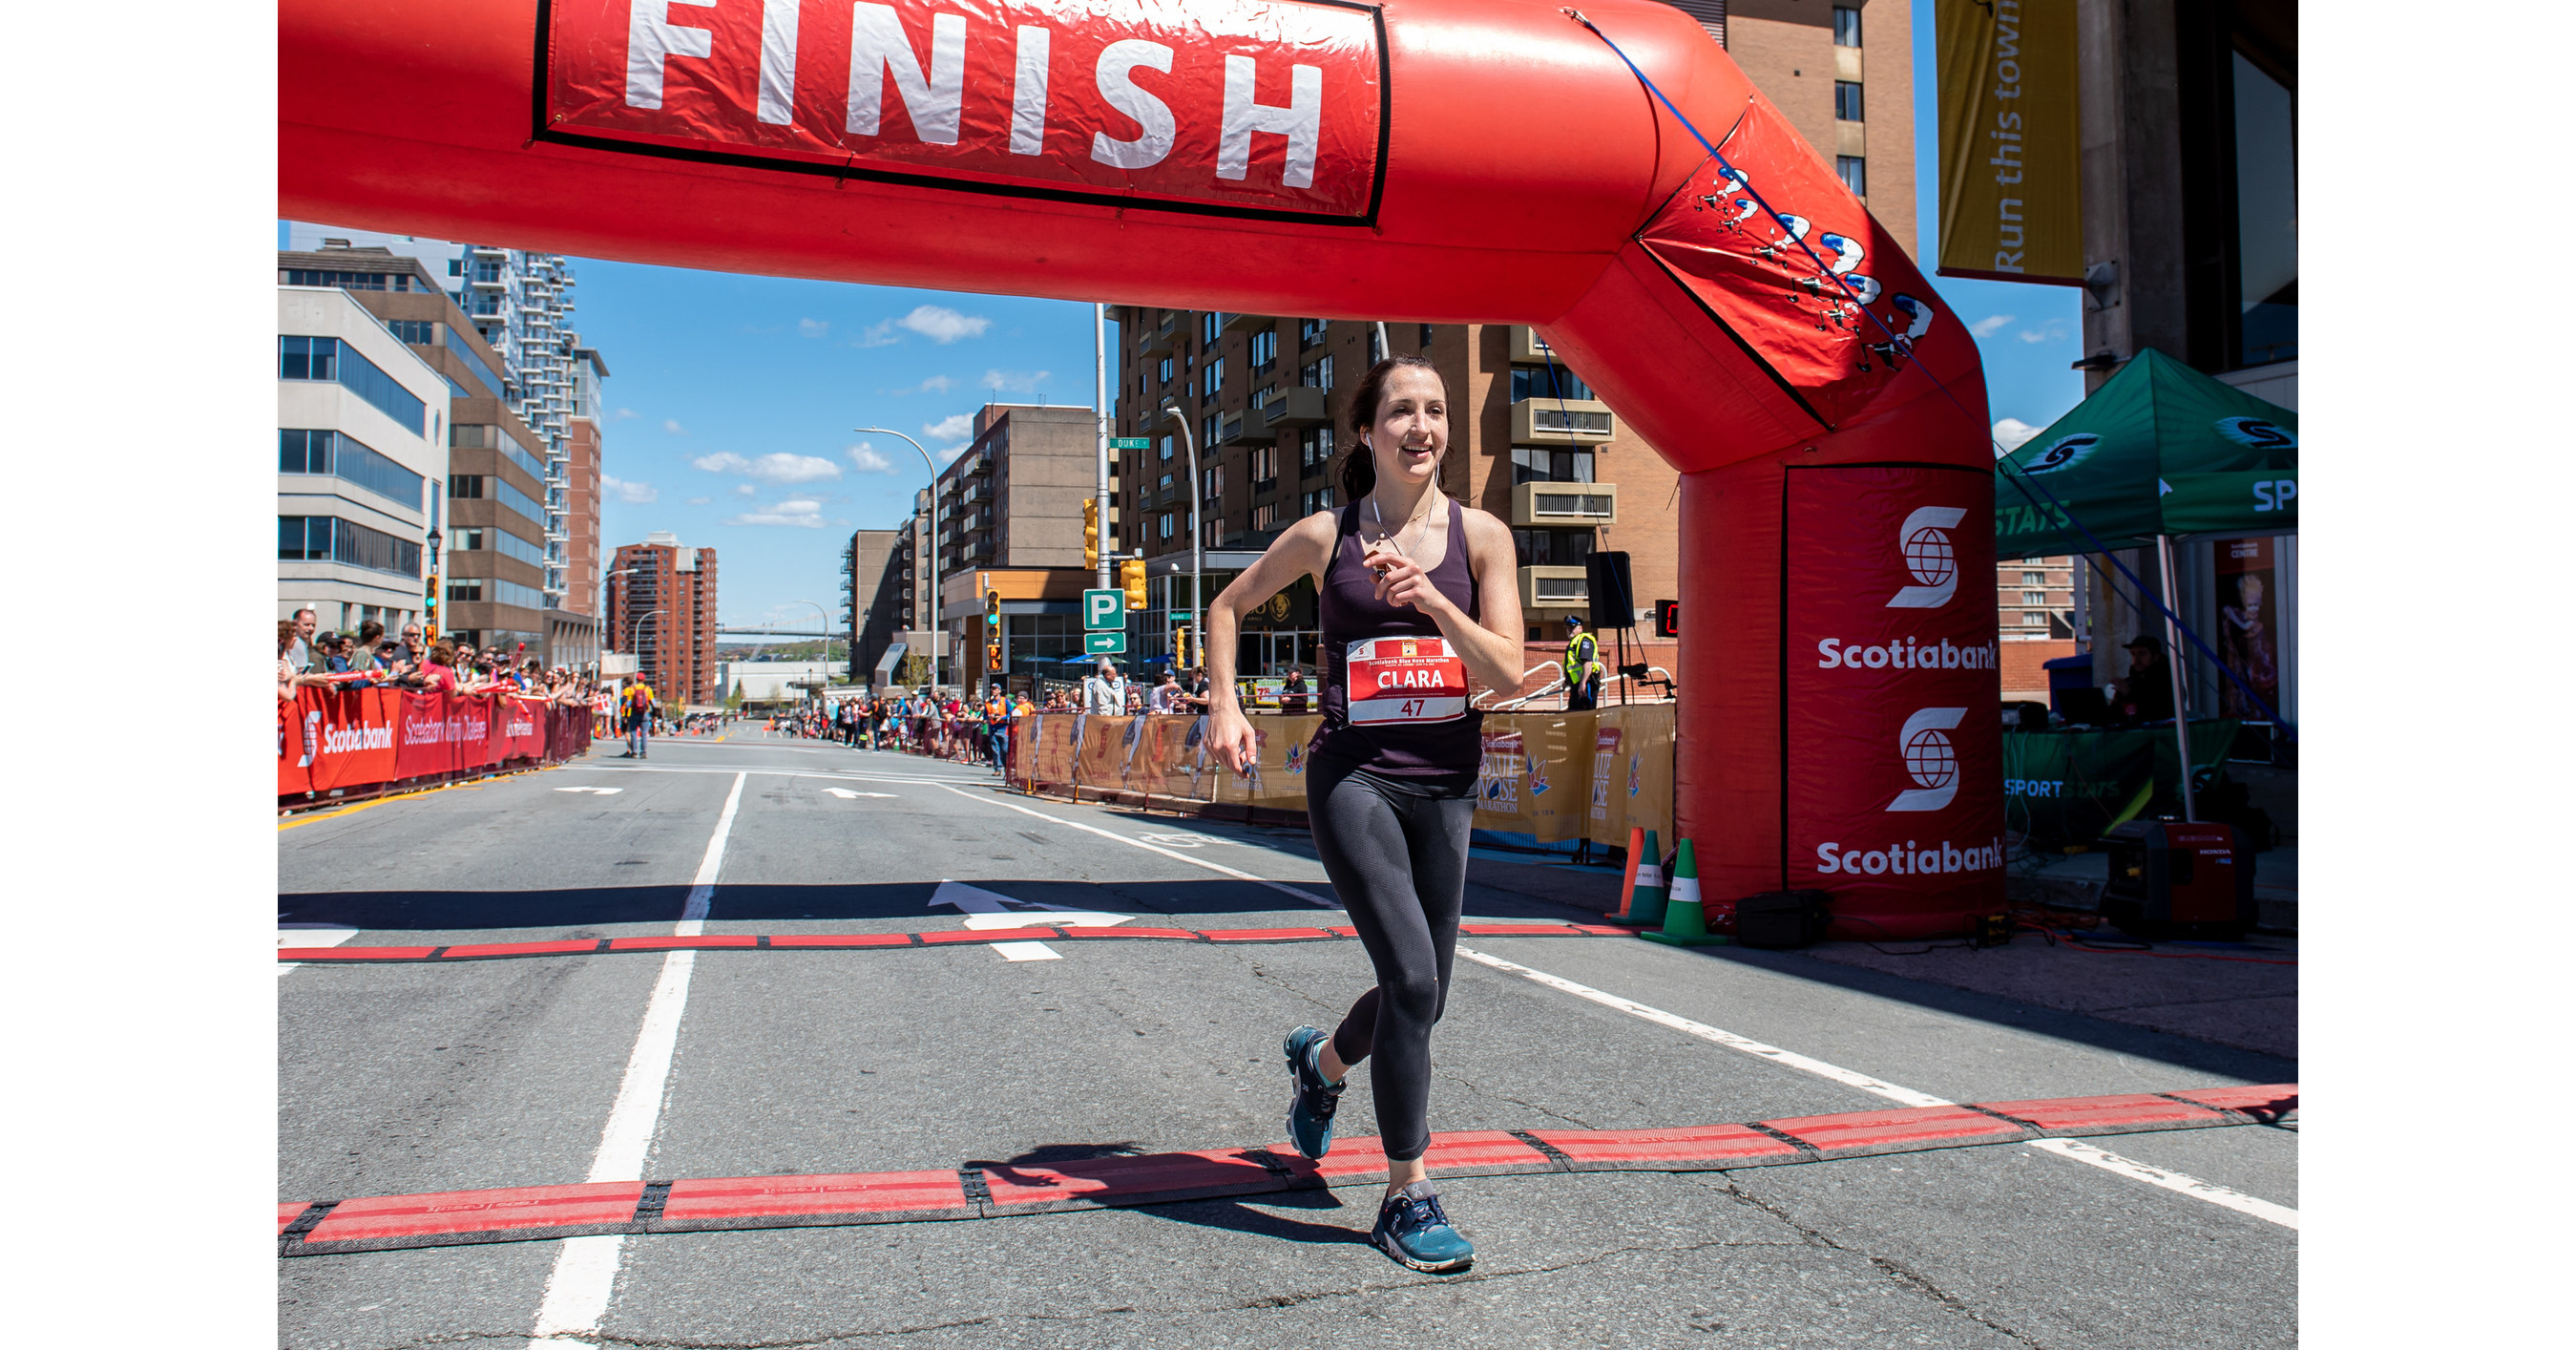 More than 10,000 racers participated in the 16th Annual Scotiabank Blue